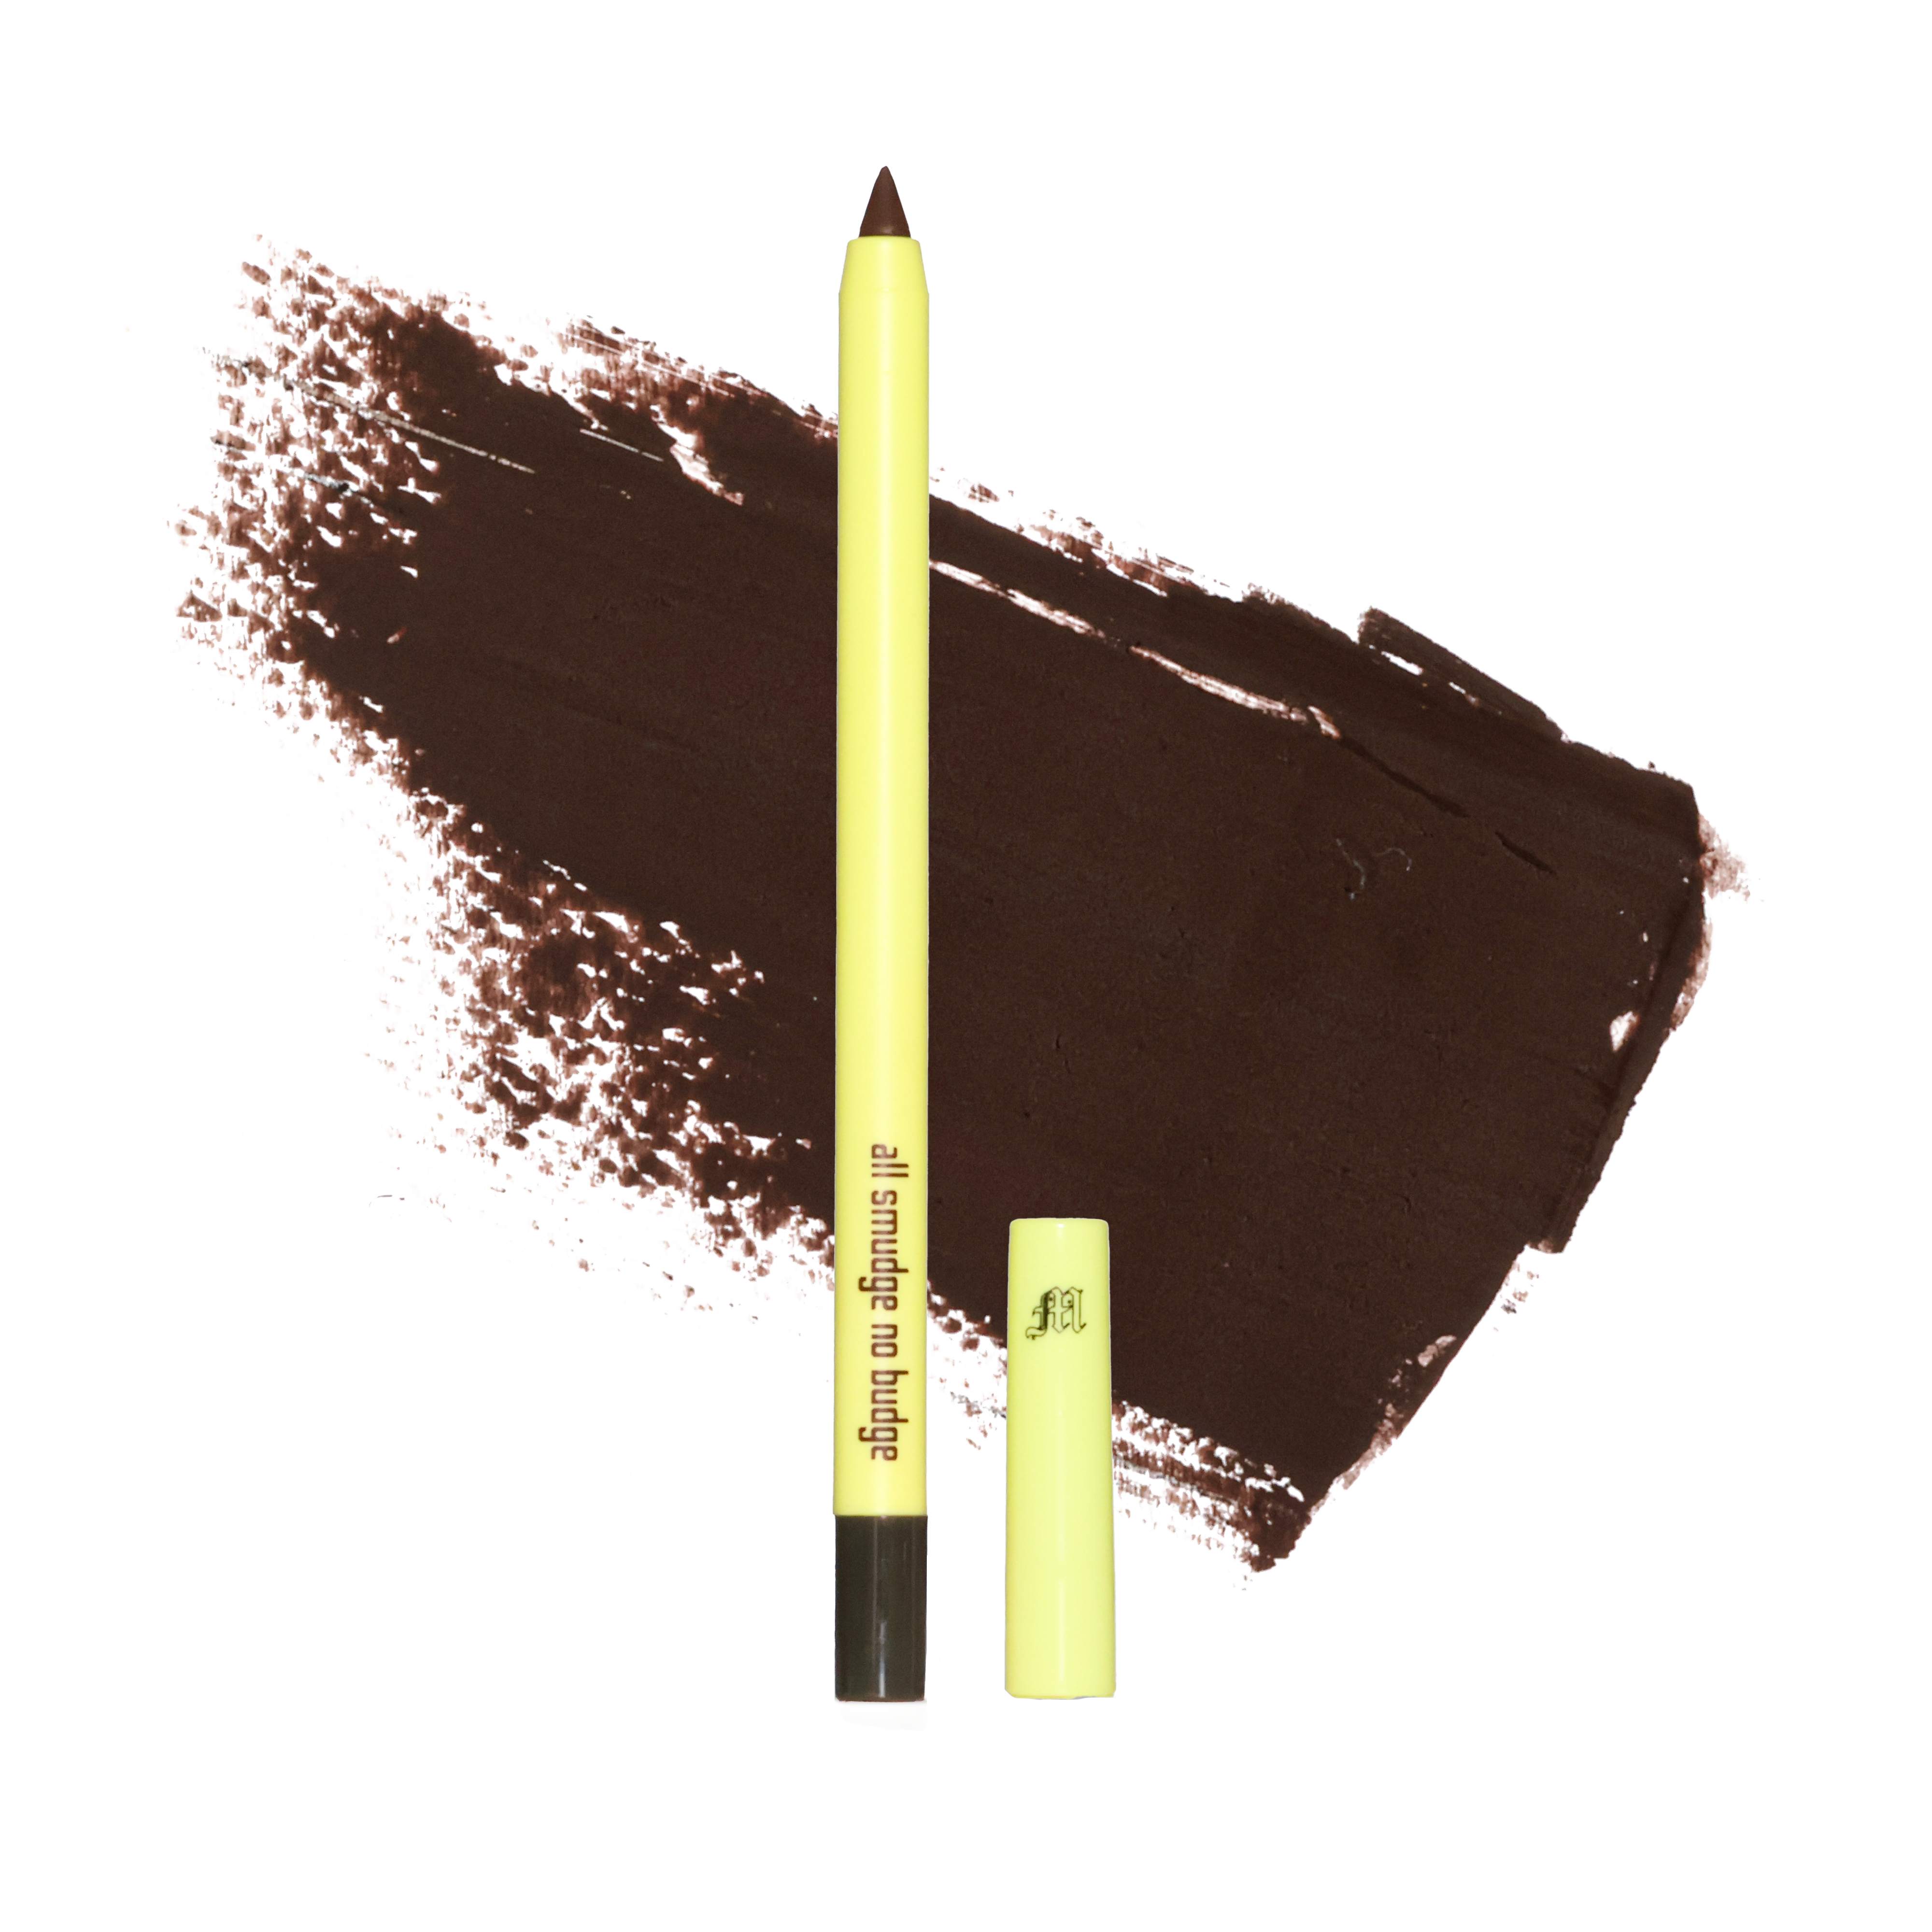 All Smudge No Budge Eye Liner Pencil - Made By Mitchell